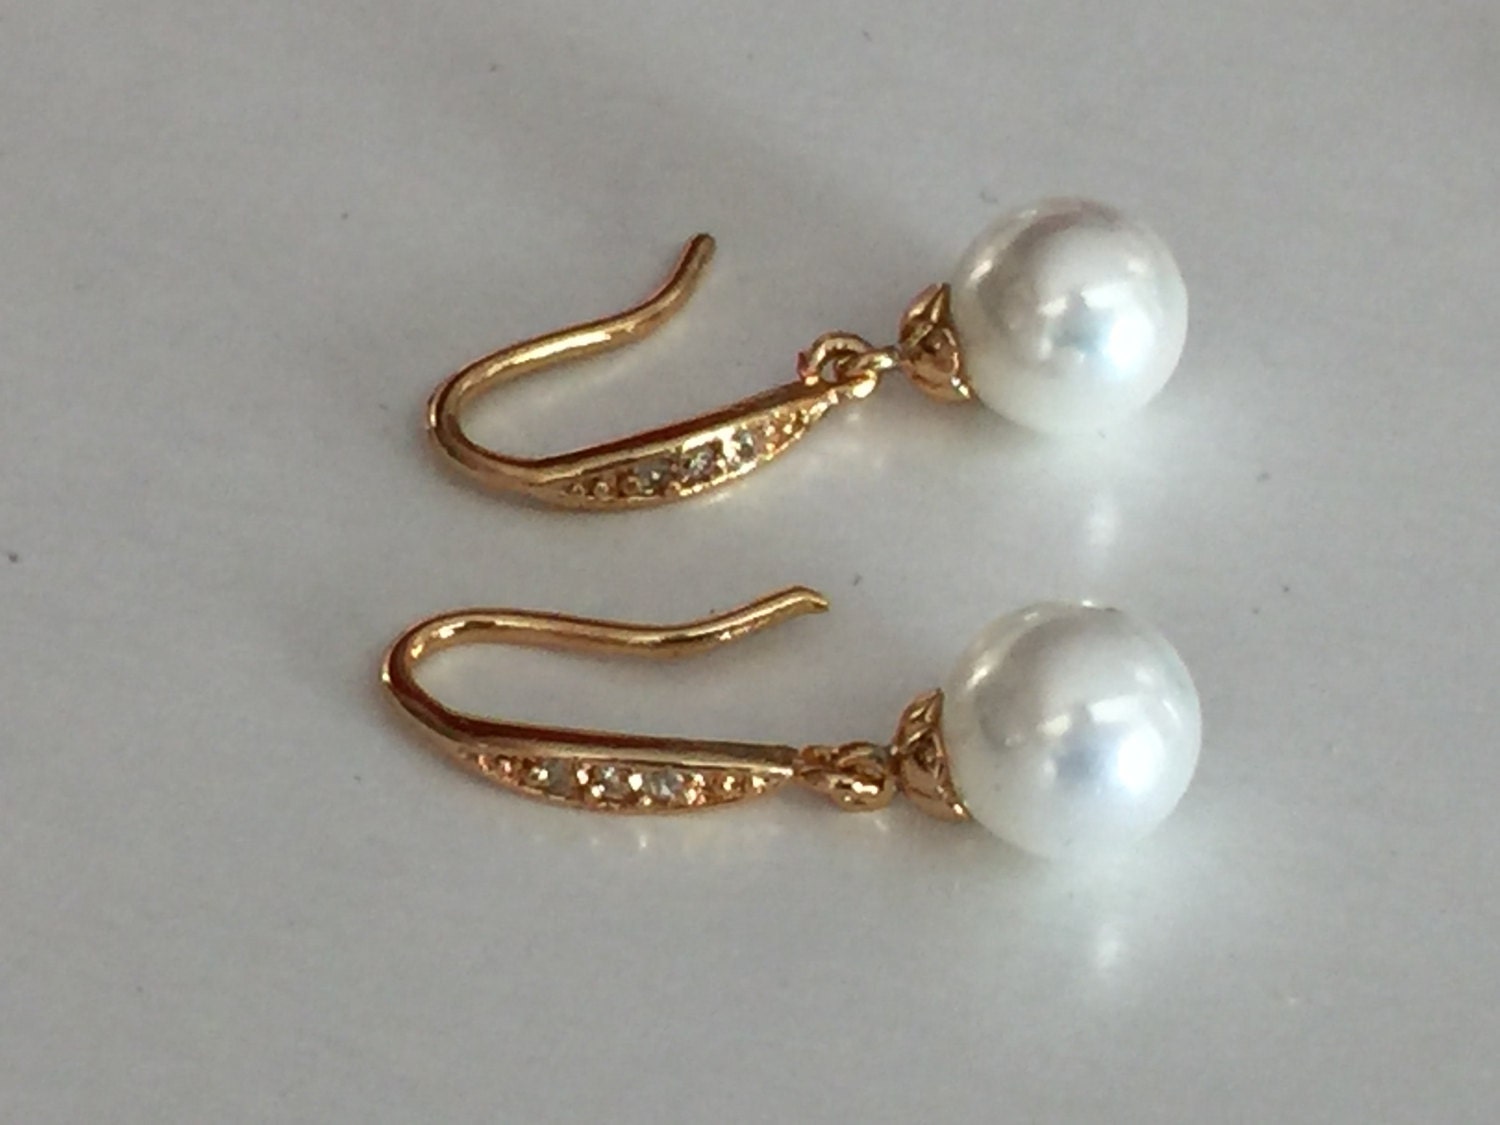 Small white pearl earrings in gold or silver please see size when purchasing- gift boxed on bridesmaid cards- bridesmaid gift-